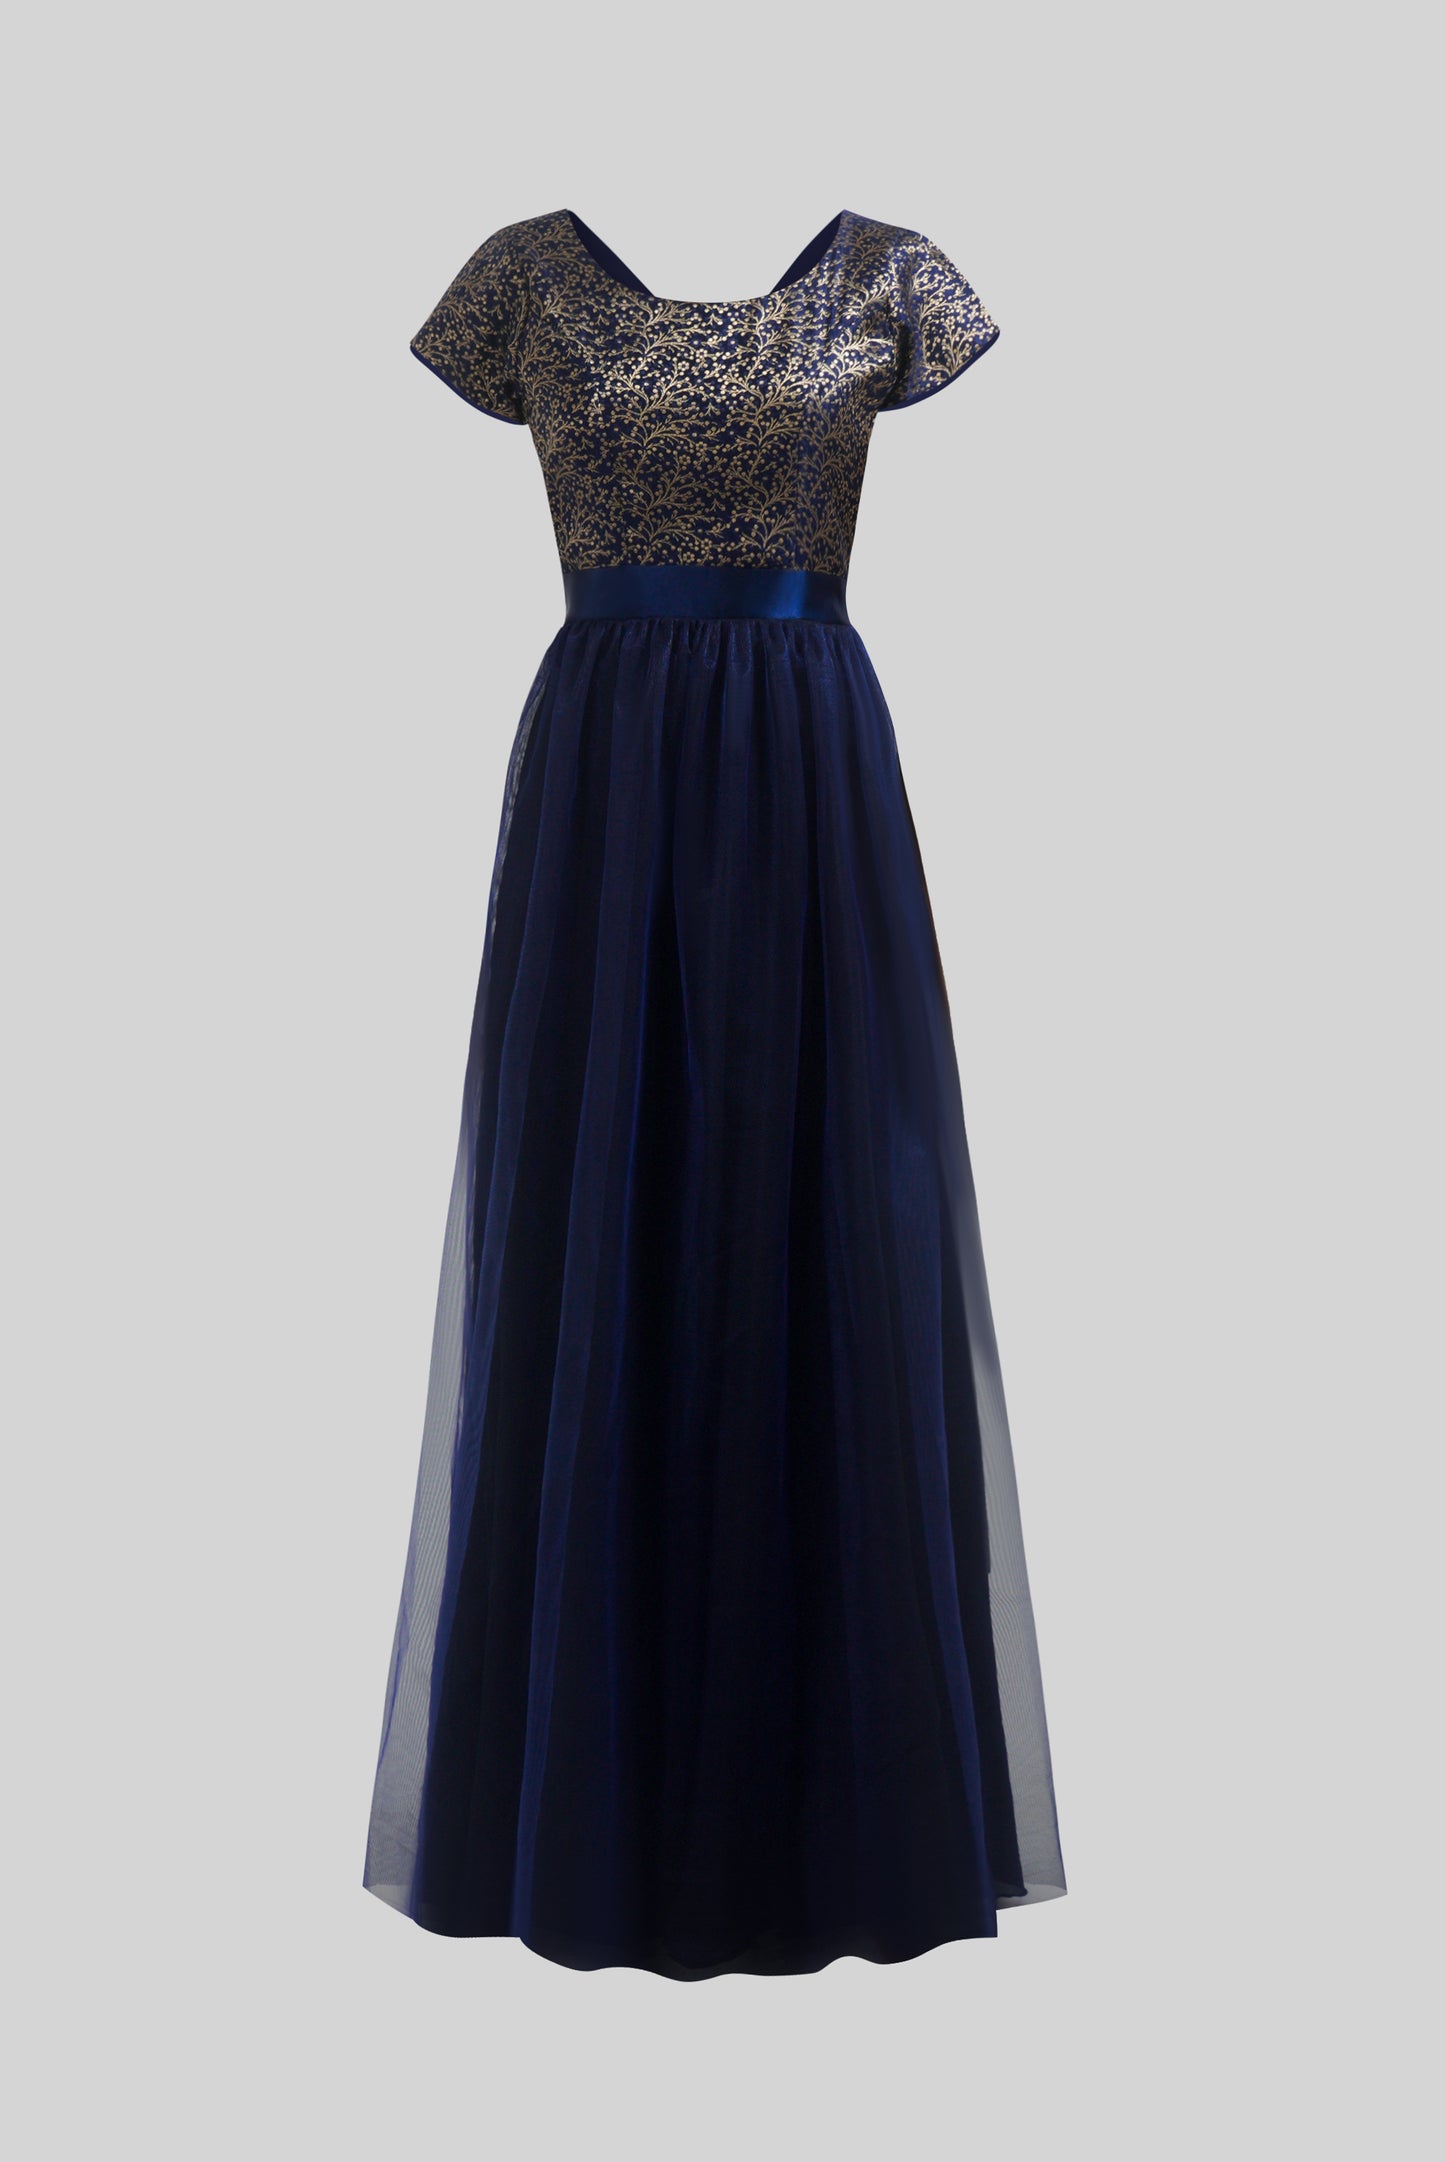 ZIA250 Blue Brocade Netted Gown